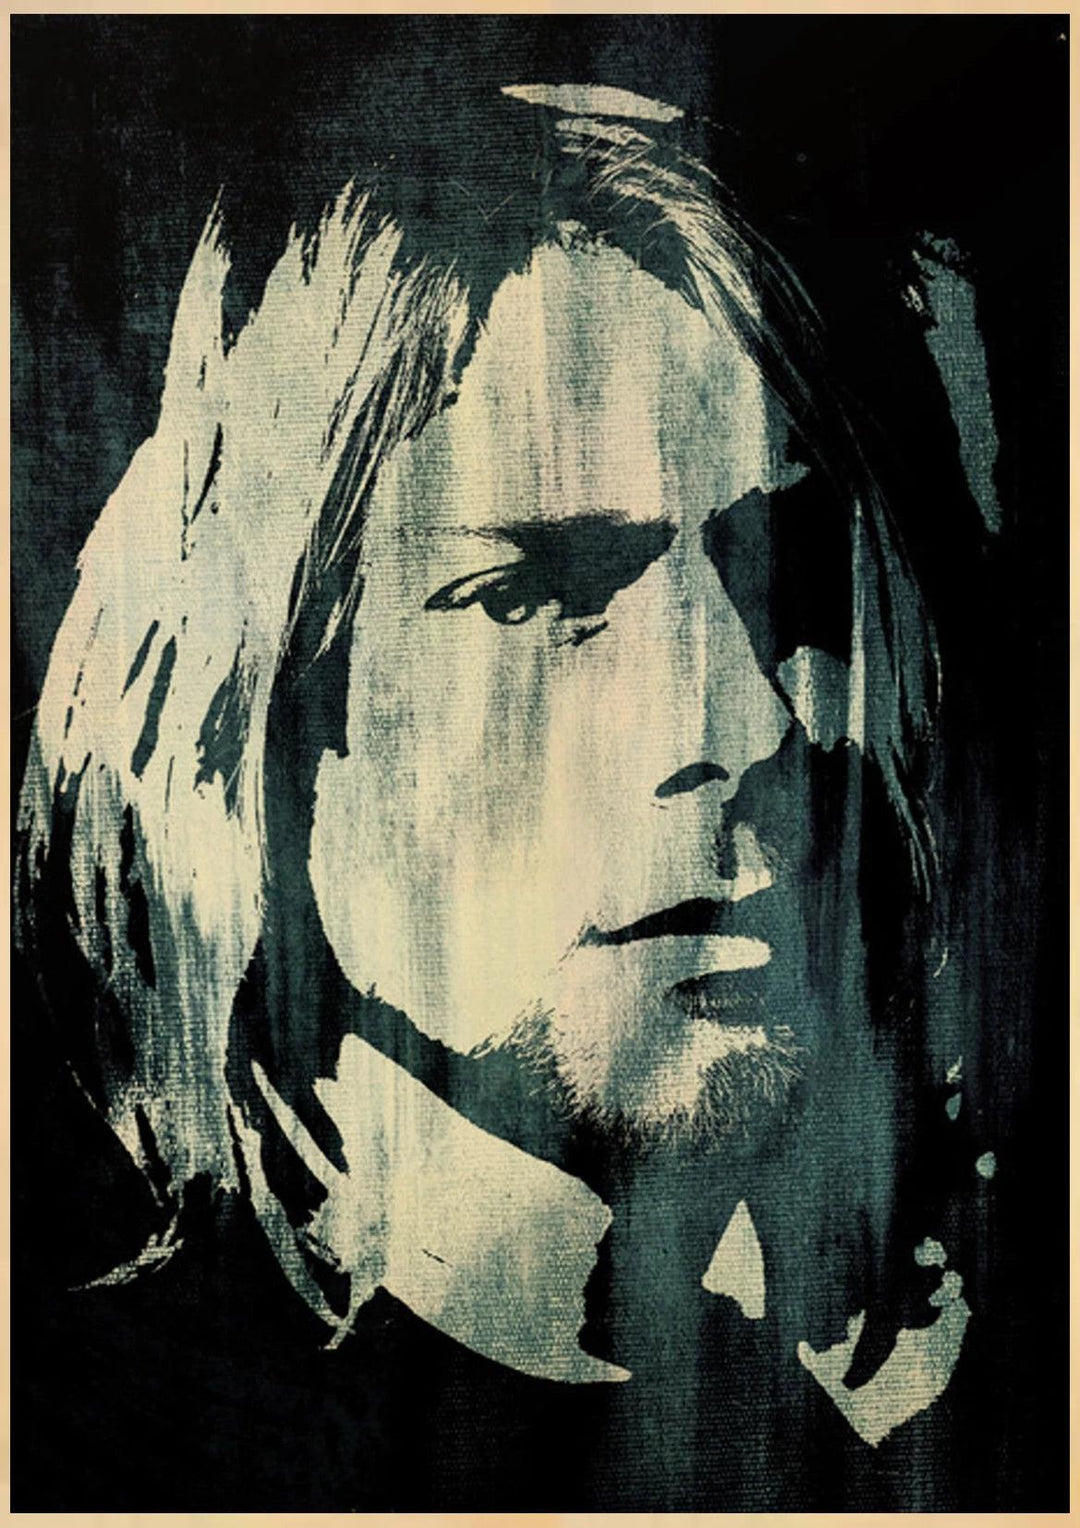 Singer Kurt Cobain Posters Rock and Roll Music Retro Kraft Paper Sticker DIY Vintage Room Bar Cafe Decor Gift Art Wall Paintings - Brand My Case